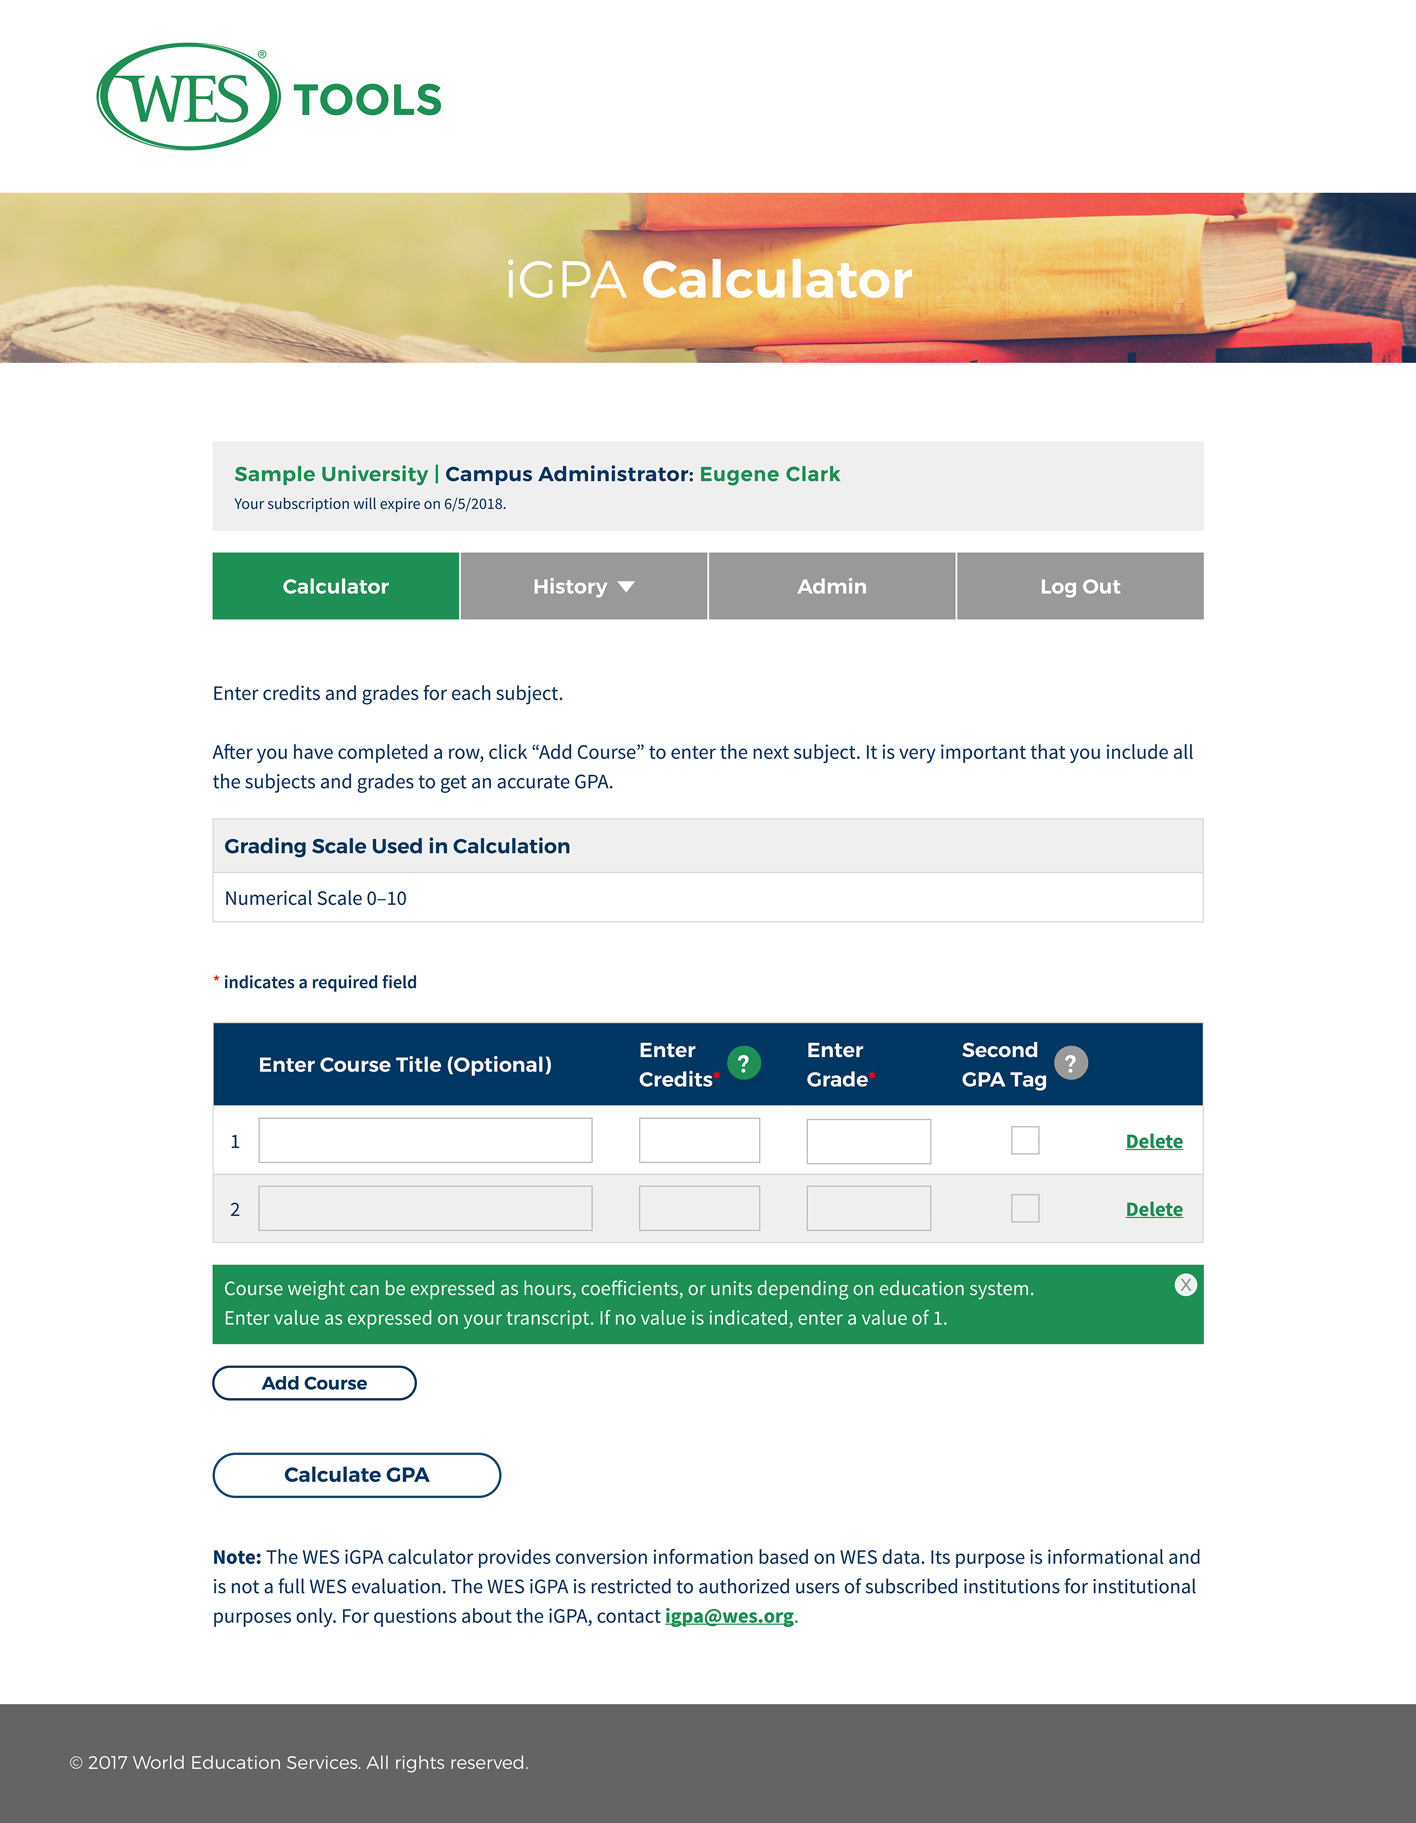 Design for the calculator page of World Education Services' iGPA calendar. Includes nav for calculator, history, admin, and logout; text fields to enter student's courses, credits, and grades; and a button to calculate GPA.